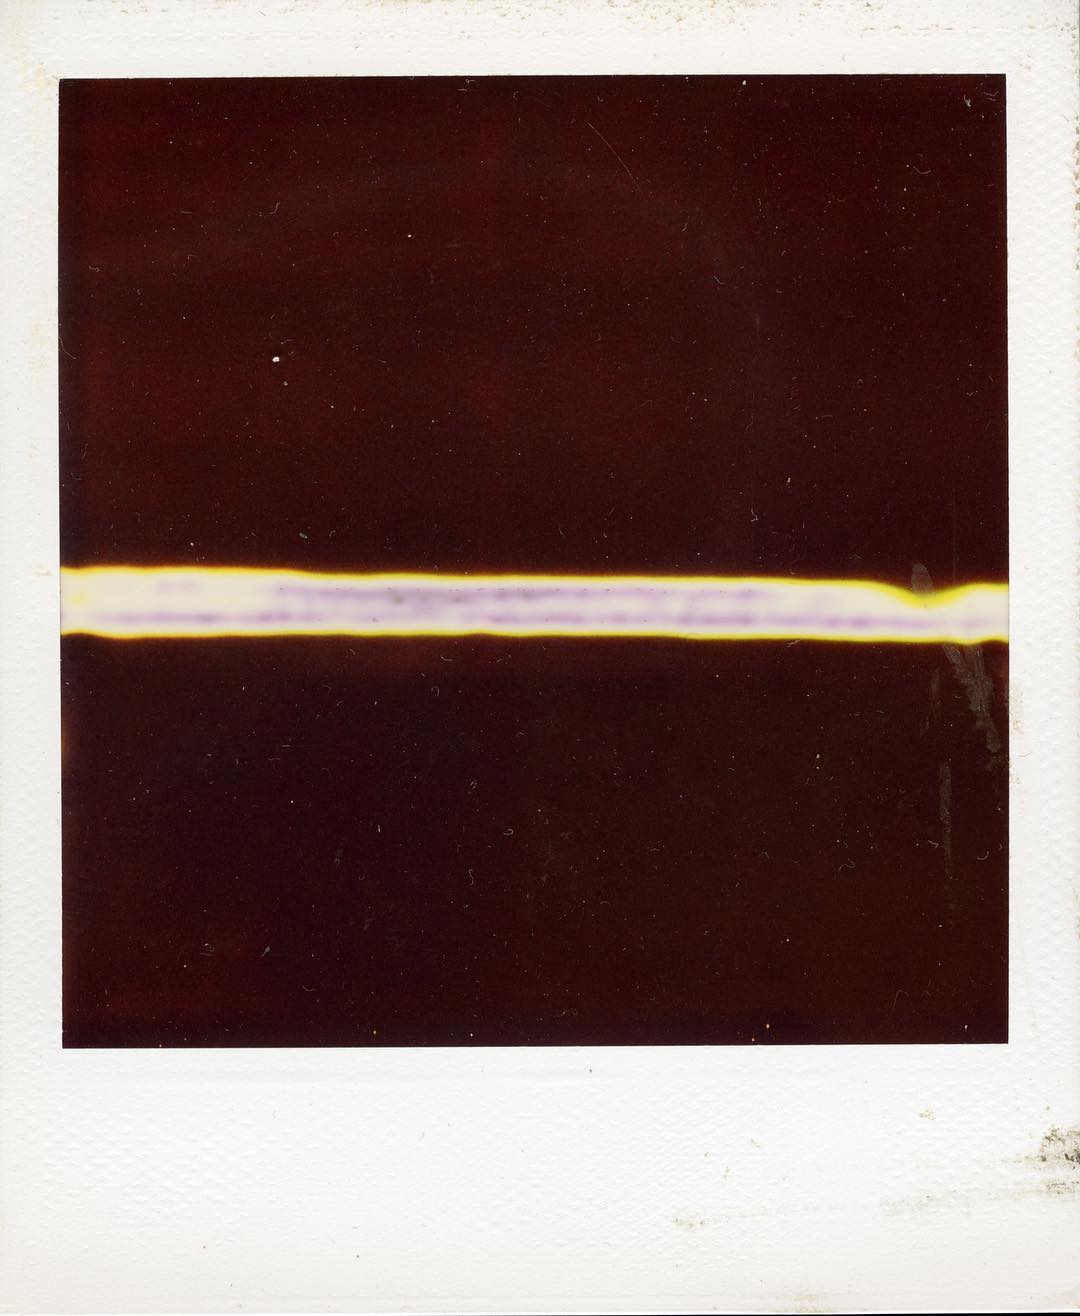 Zap! #aprilfailsday Another example of a pack that expelled more than one piece of film per shot. #film #filmphotography #polaroid #sx70 #impossibleproject